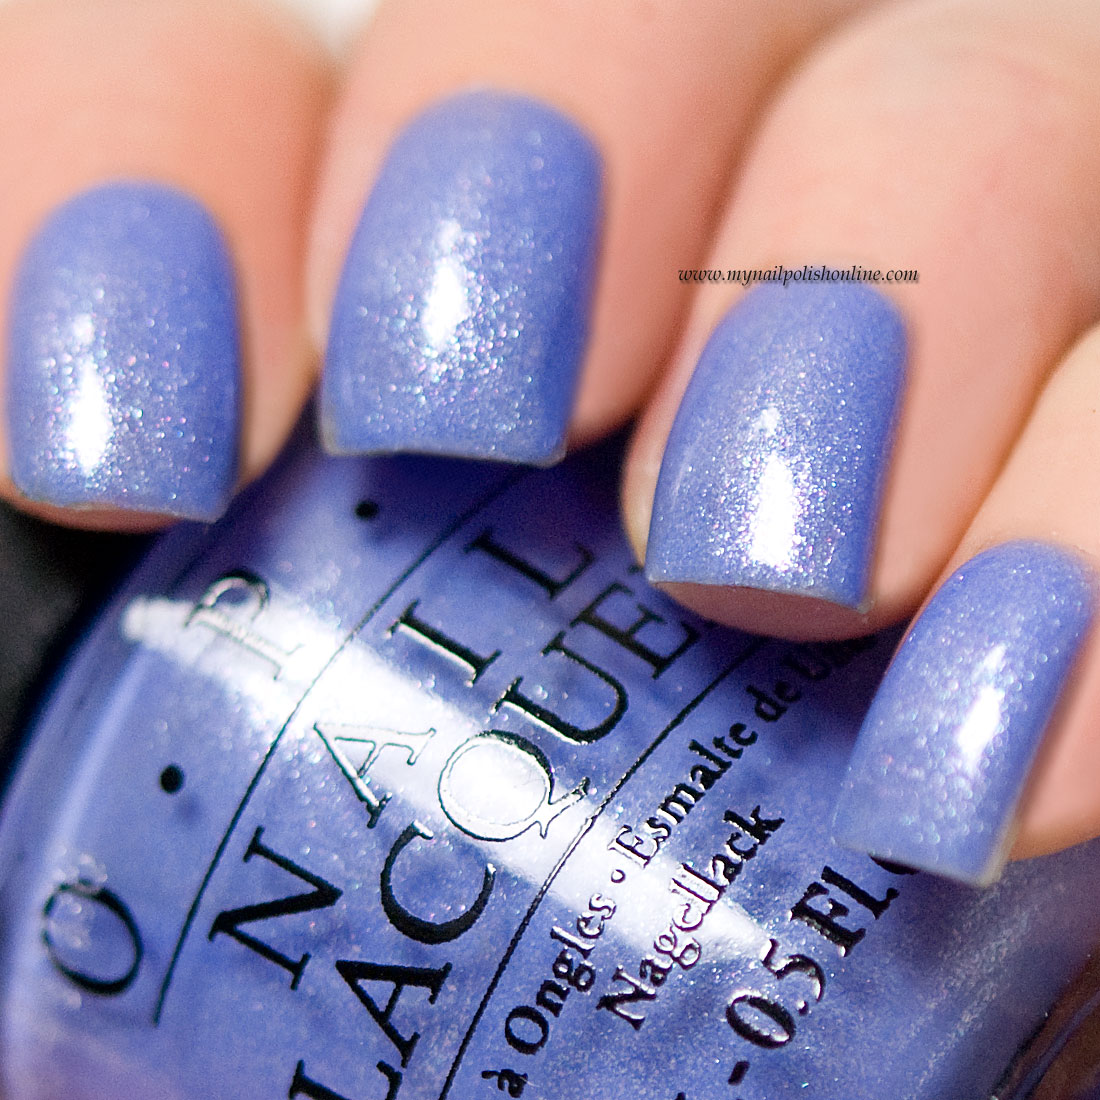 OPI - Show Us Your Tips! - My Nail Polish Online